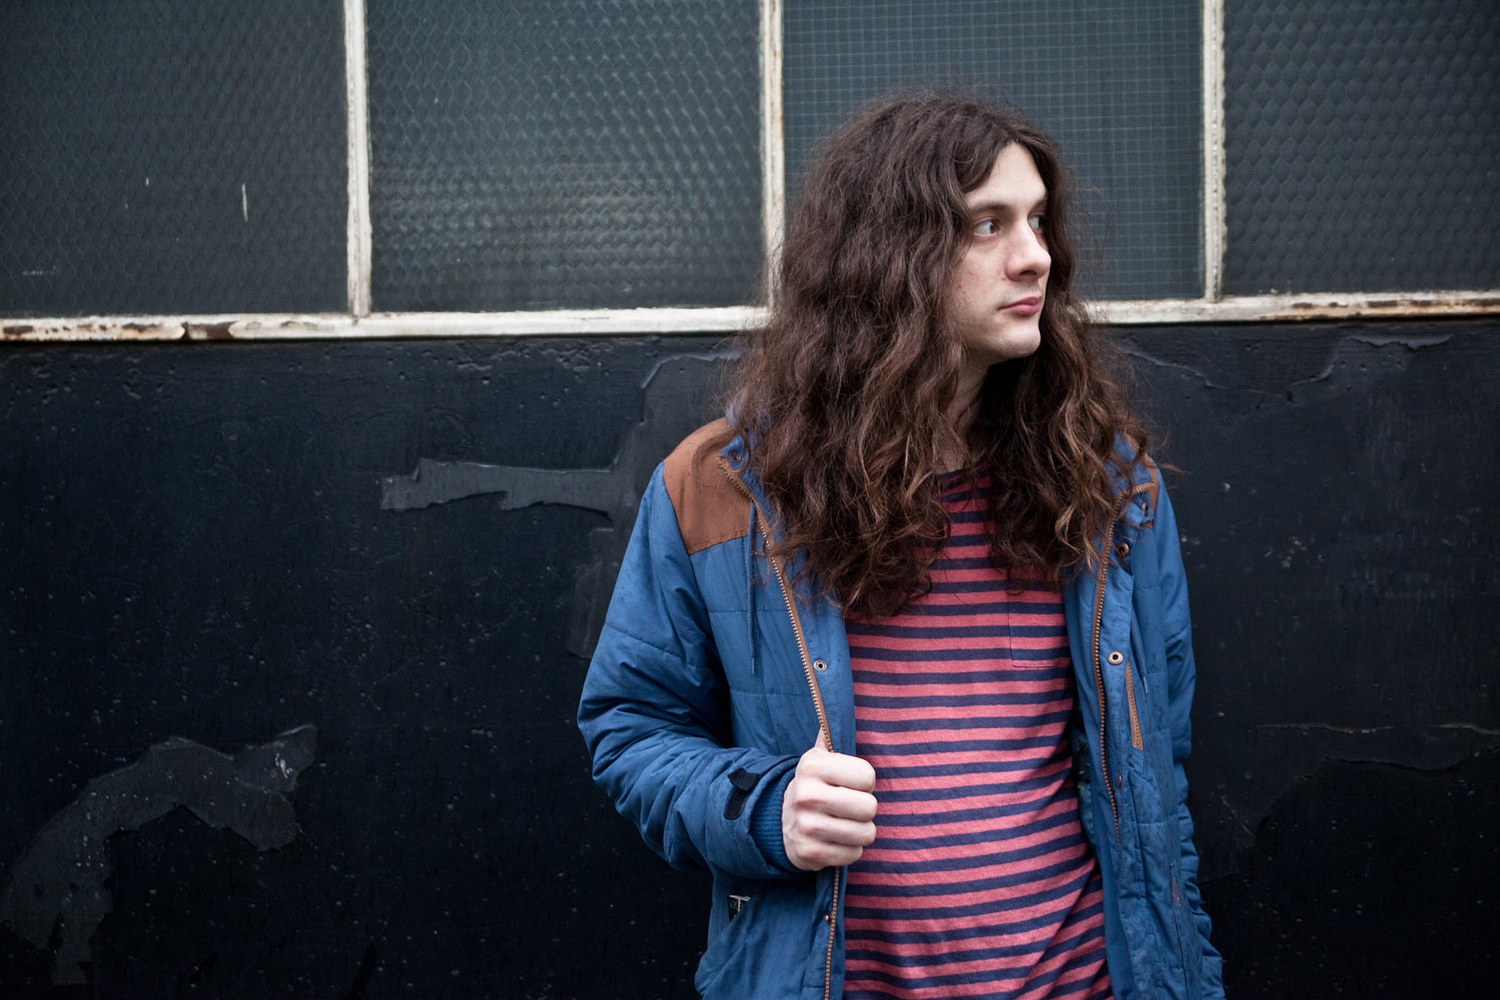 Kurt Vile plays ‘Wild Imagination’ in session for Conan